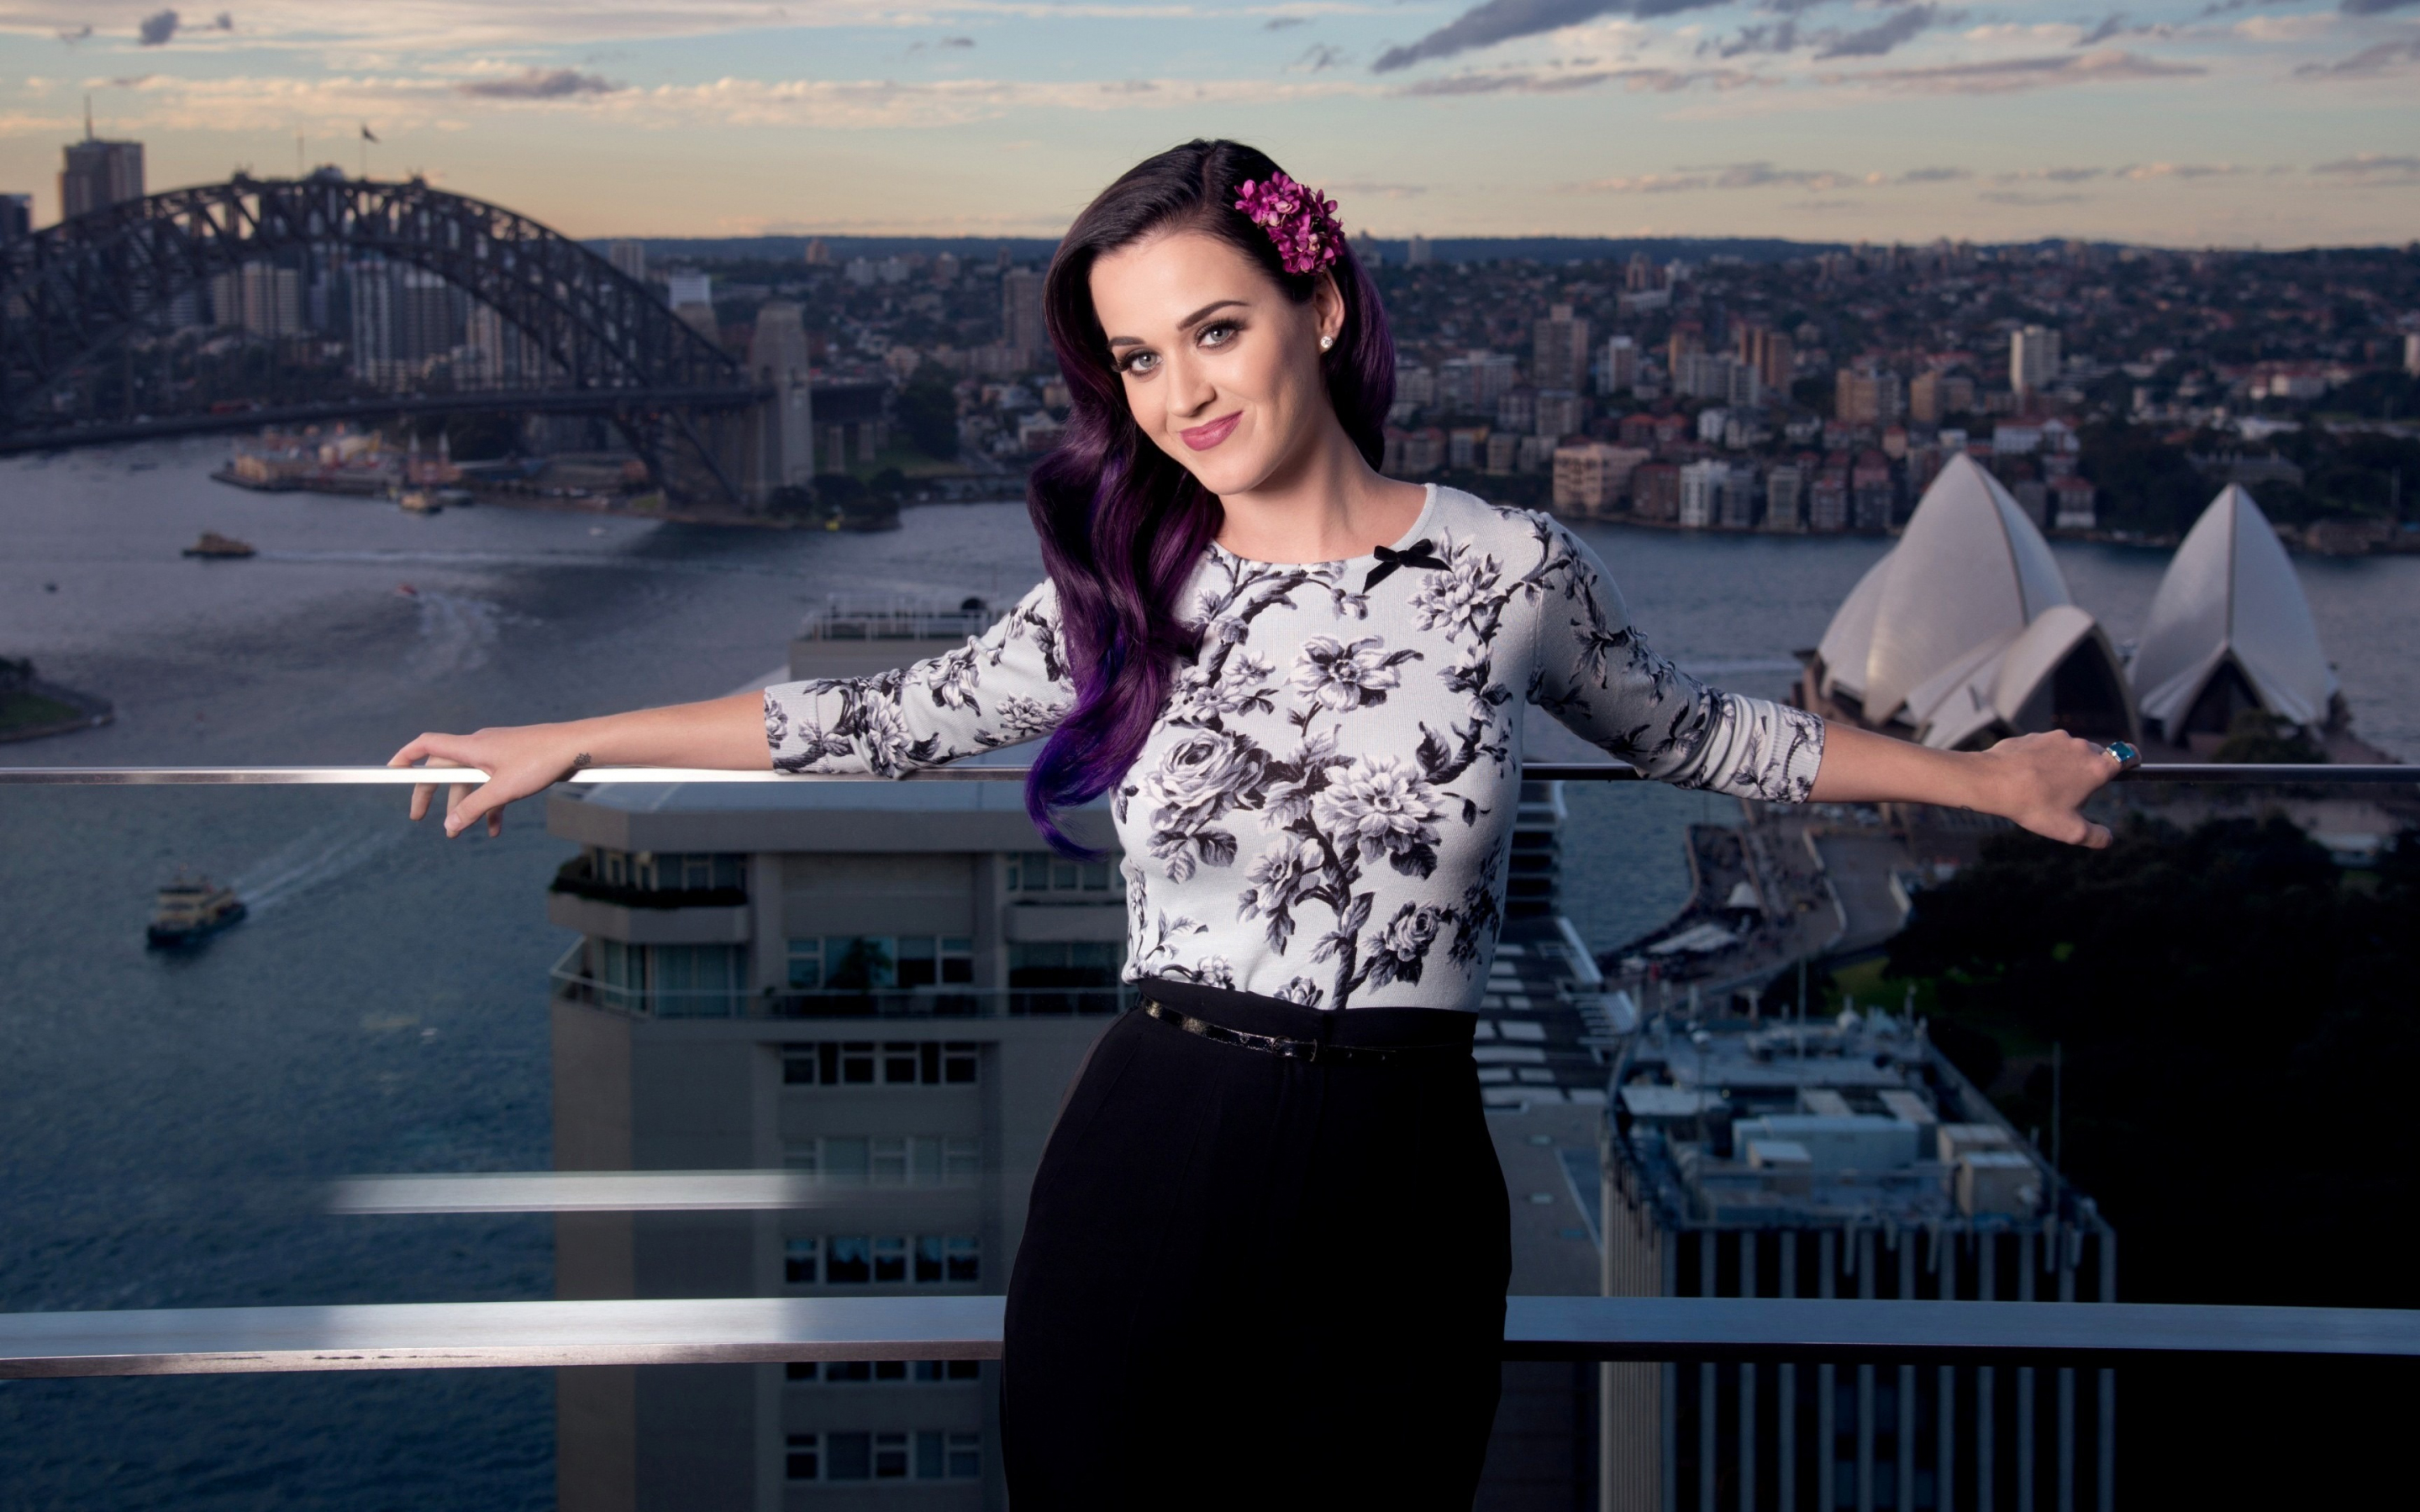 Colored hair, smile, katy perry, singer, 2880x1800 wallpaper